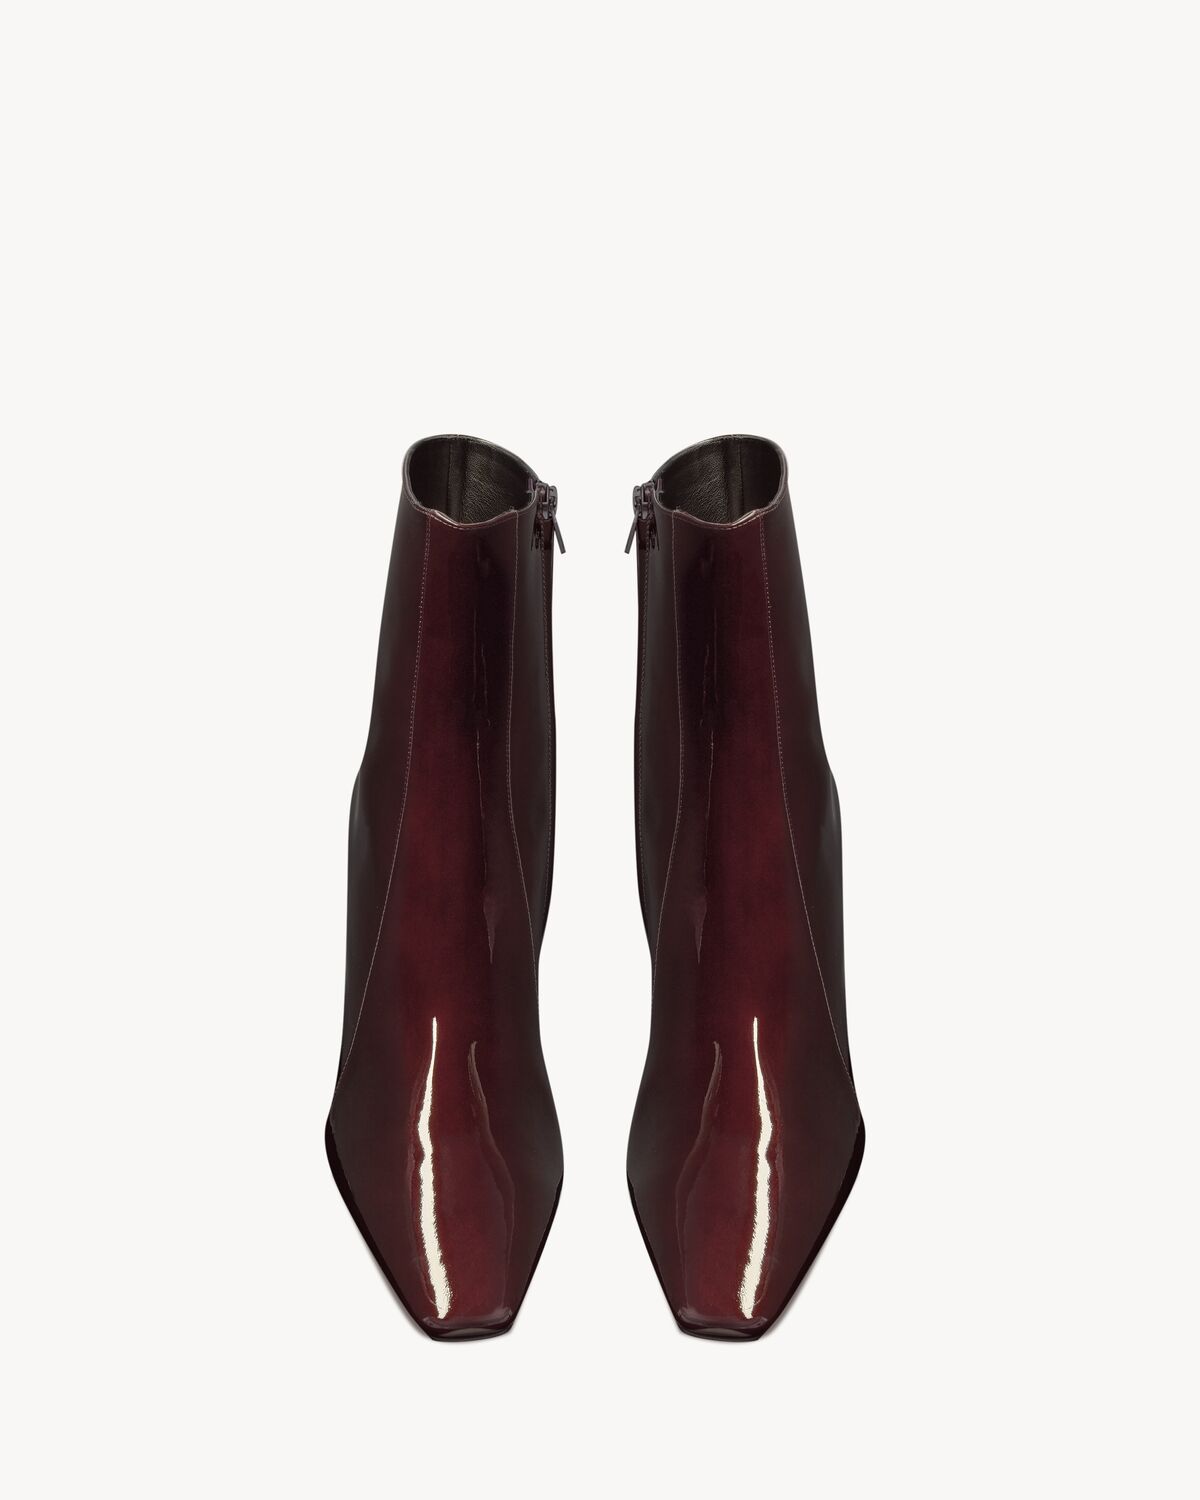 RAINER boots in patent leather